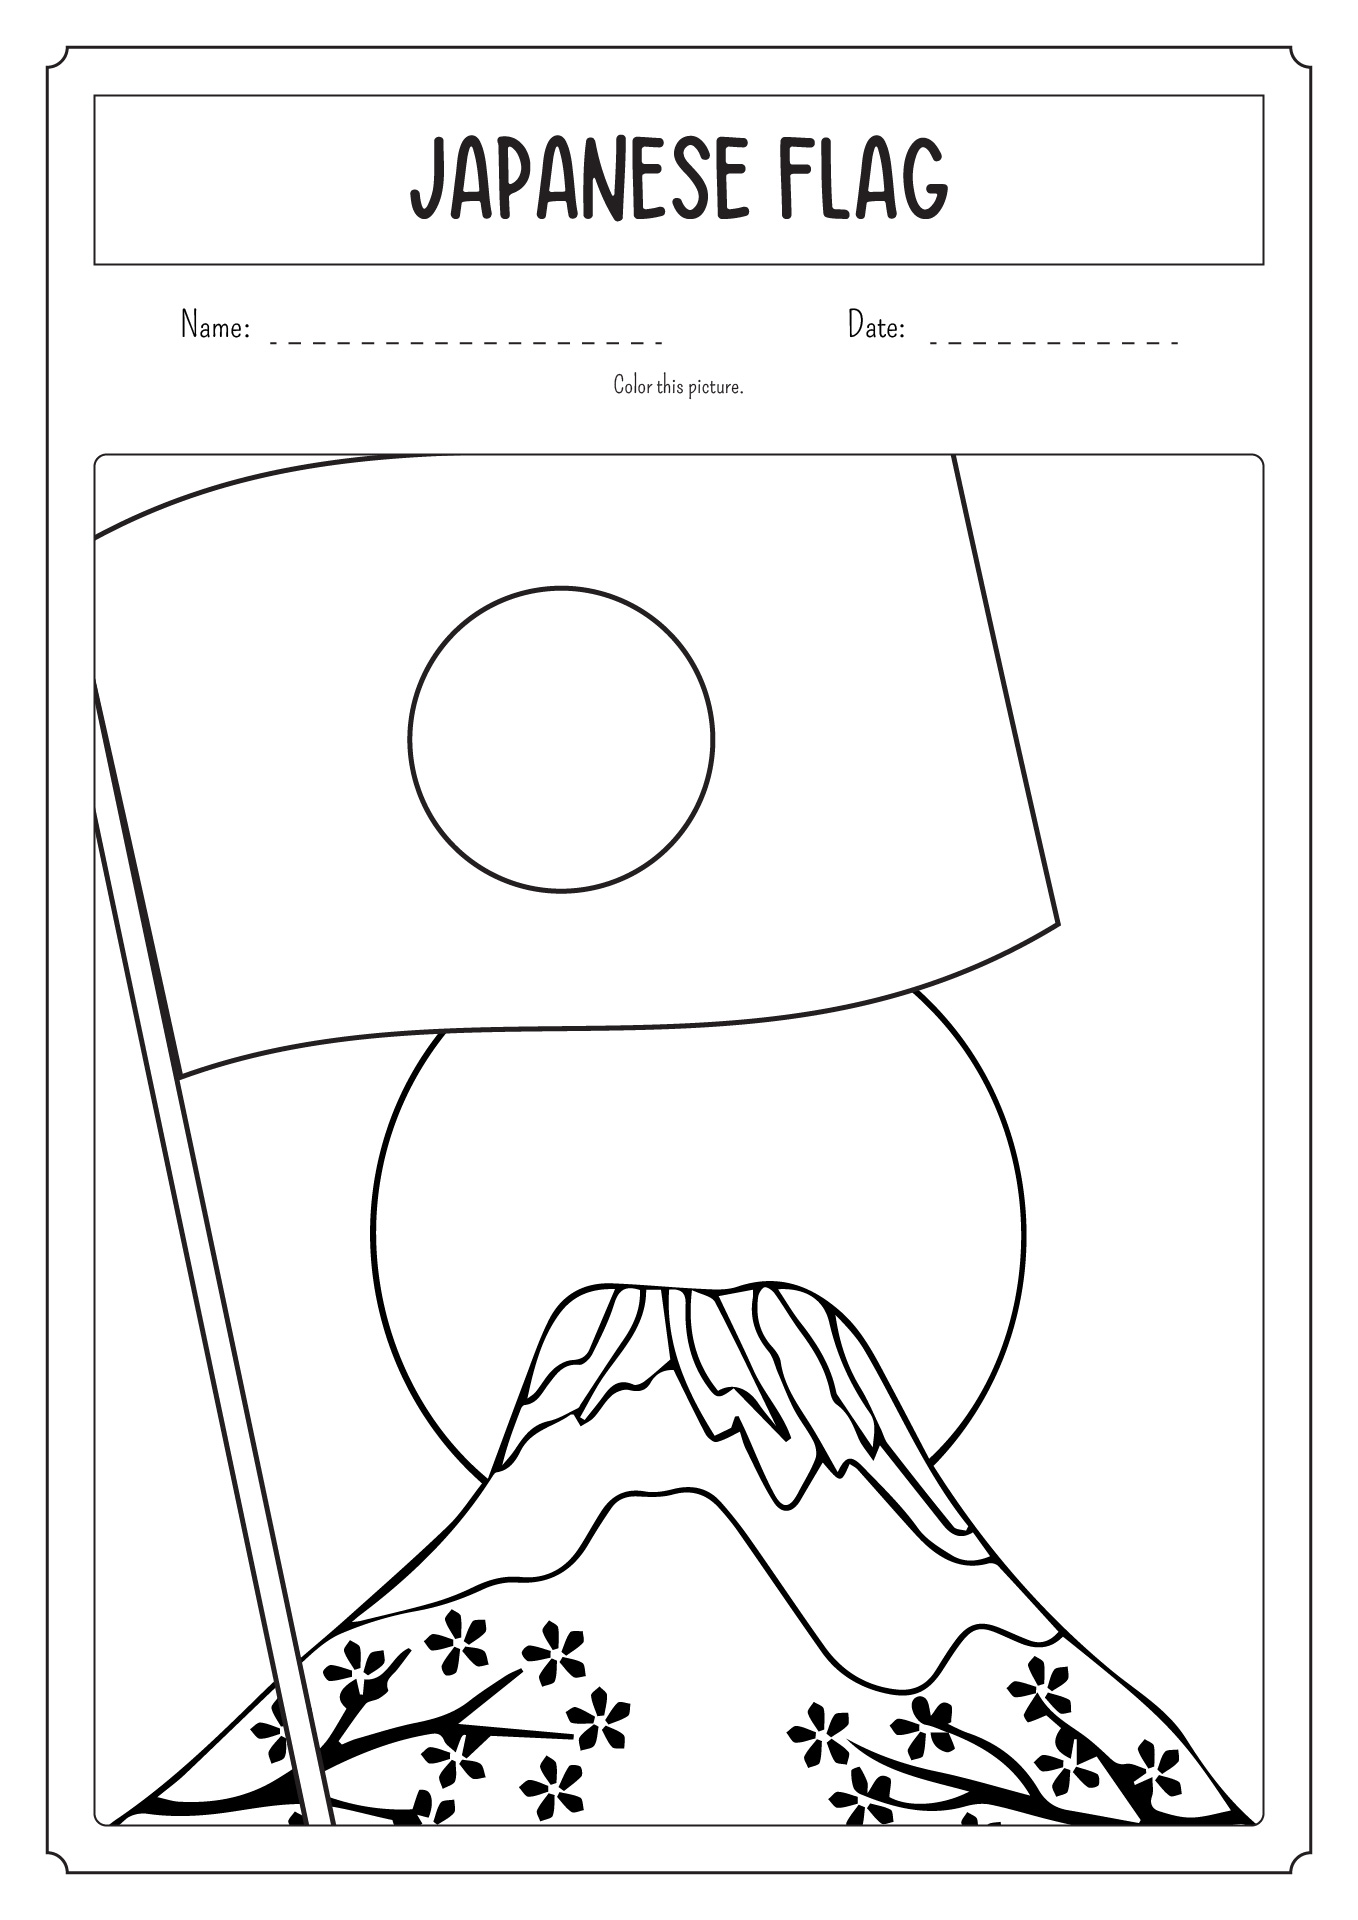 Japanese Flag Coloring Page Image